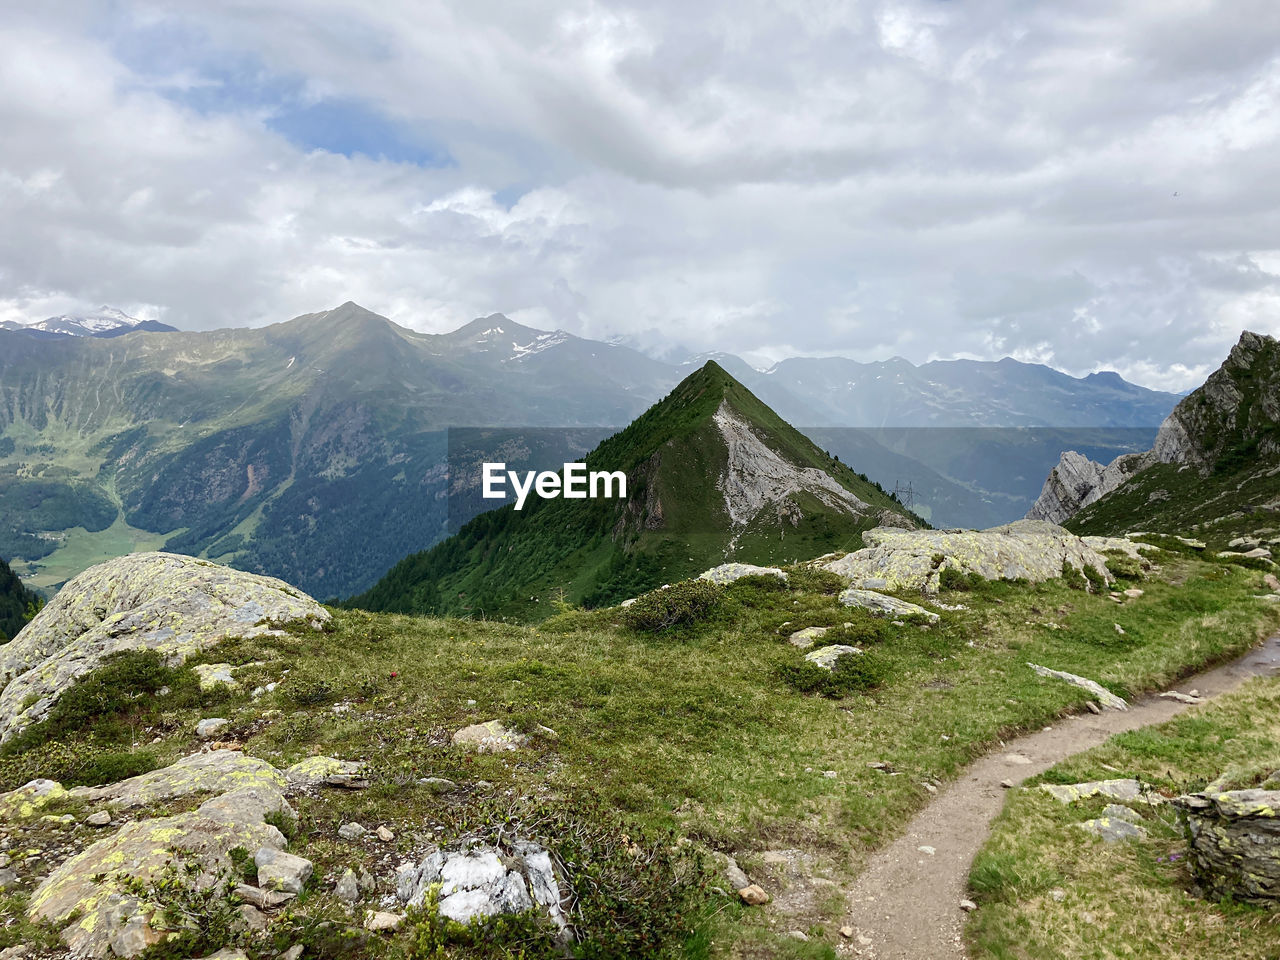 Scenic view of a pyramid mountain against sky